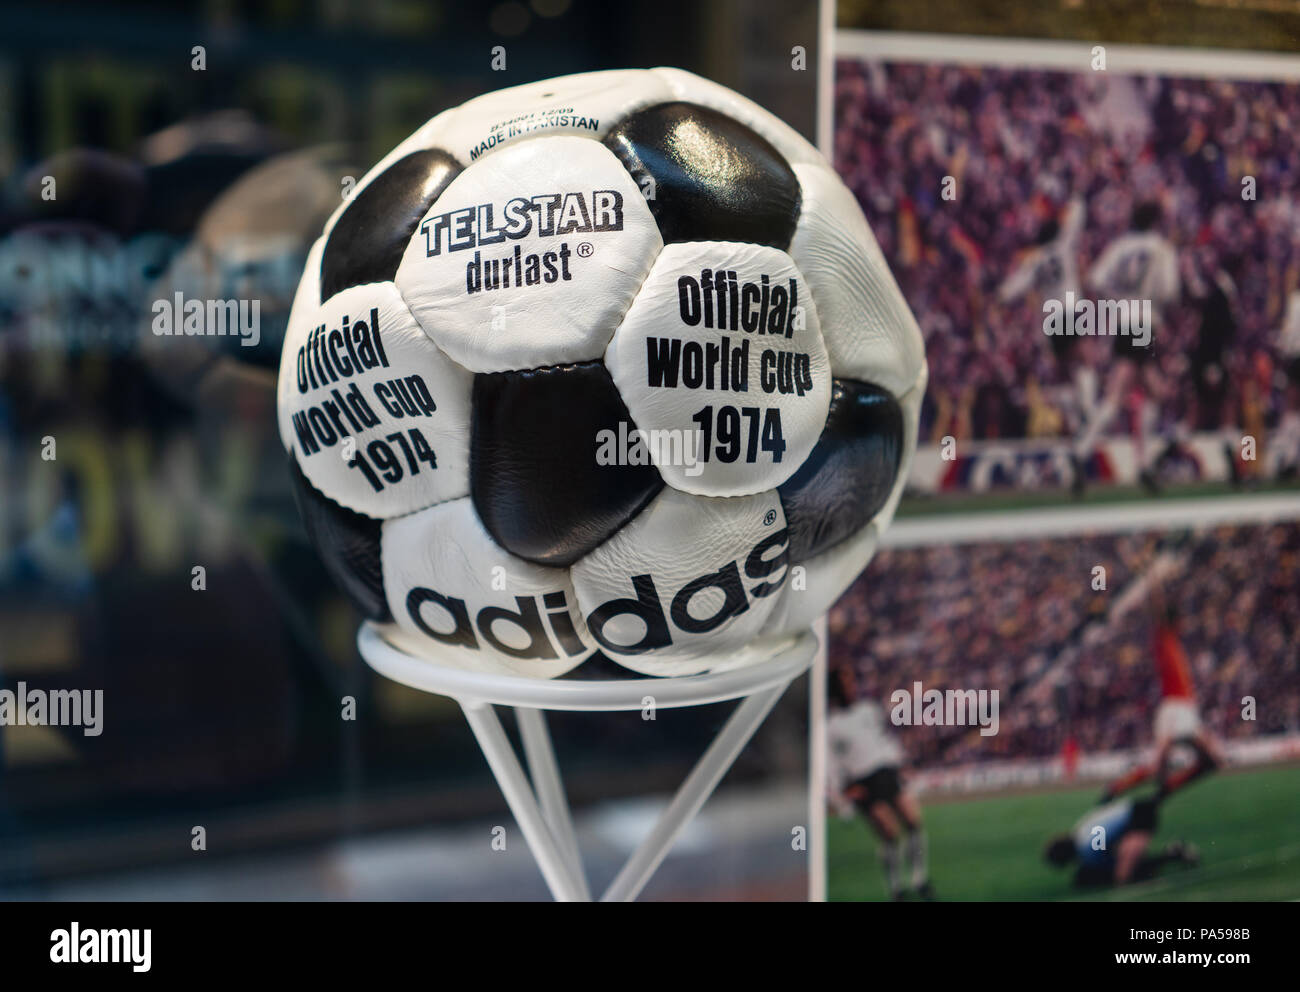 July 7, 2018, Moscow, Russia Official ball FIFA World Cup 1974 in West Germany Adidas Telstar durlast. Stock Photo